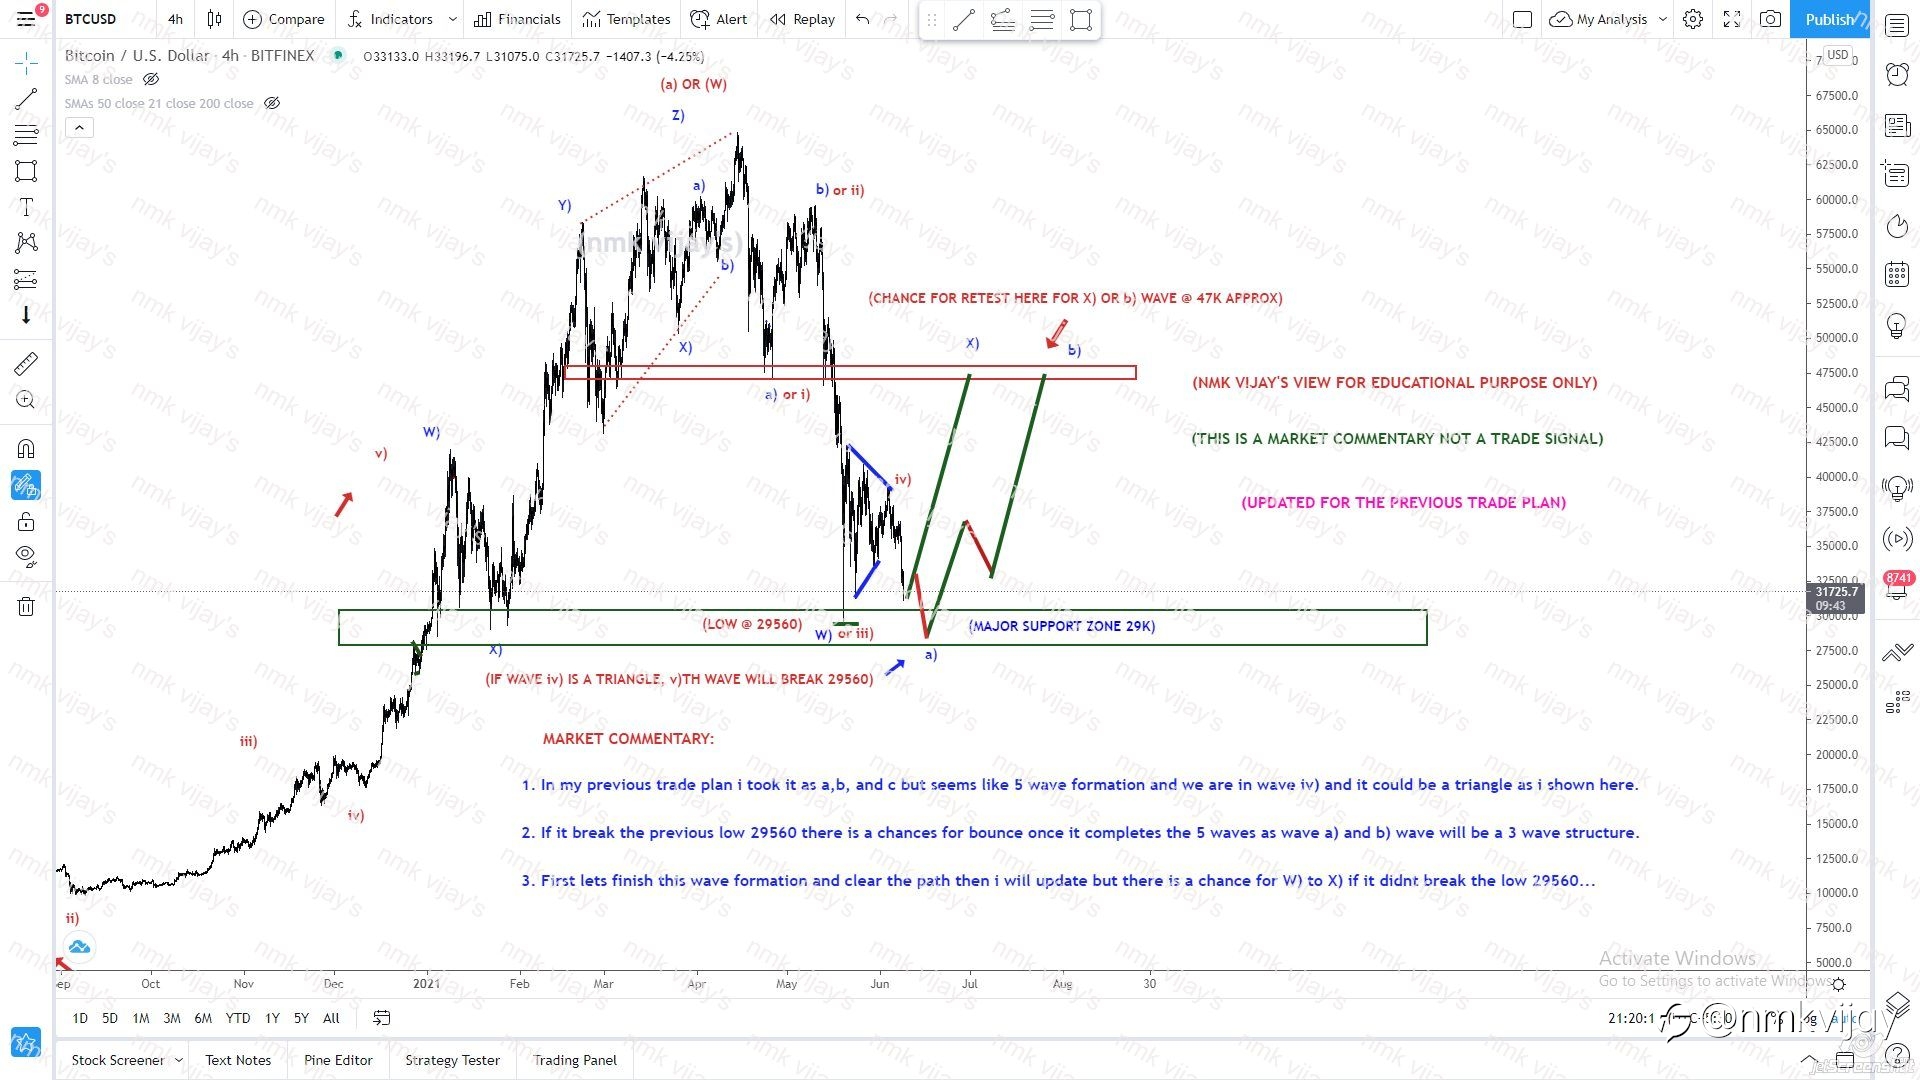 BITCOIN-Wave iv) is a triangle? will break 29560 for wave v) ?